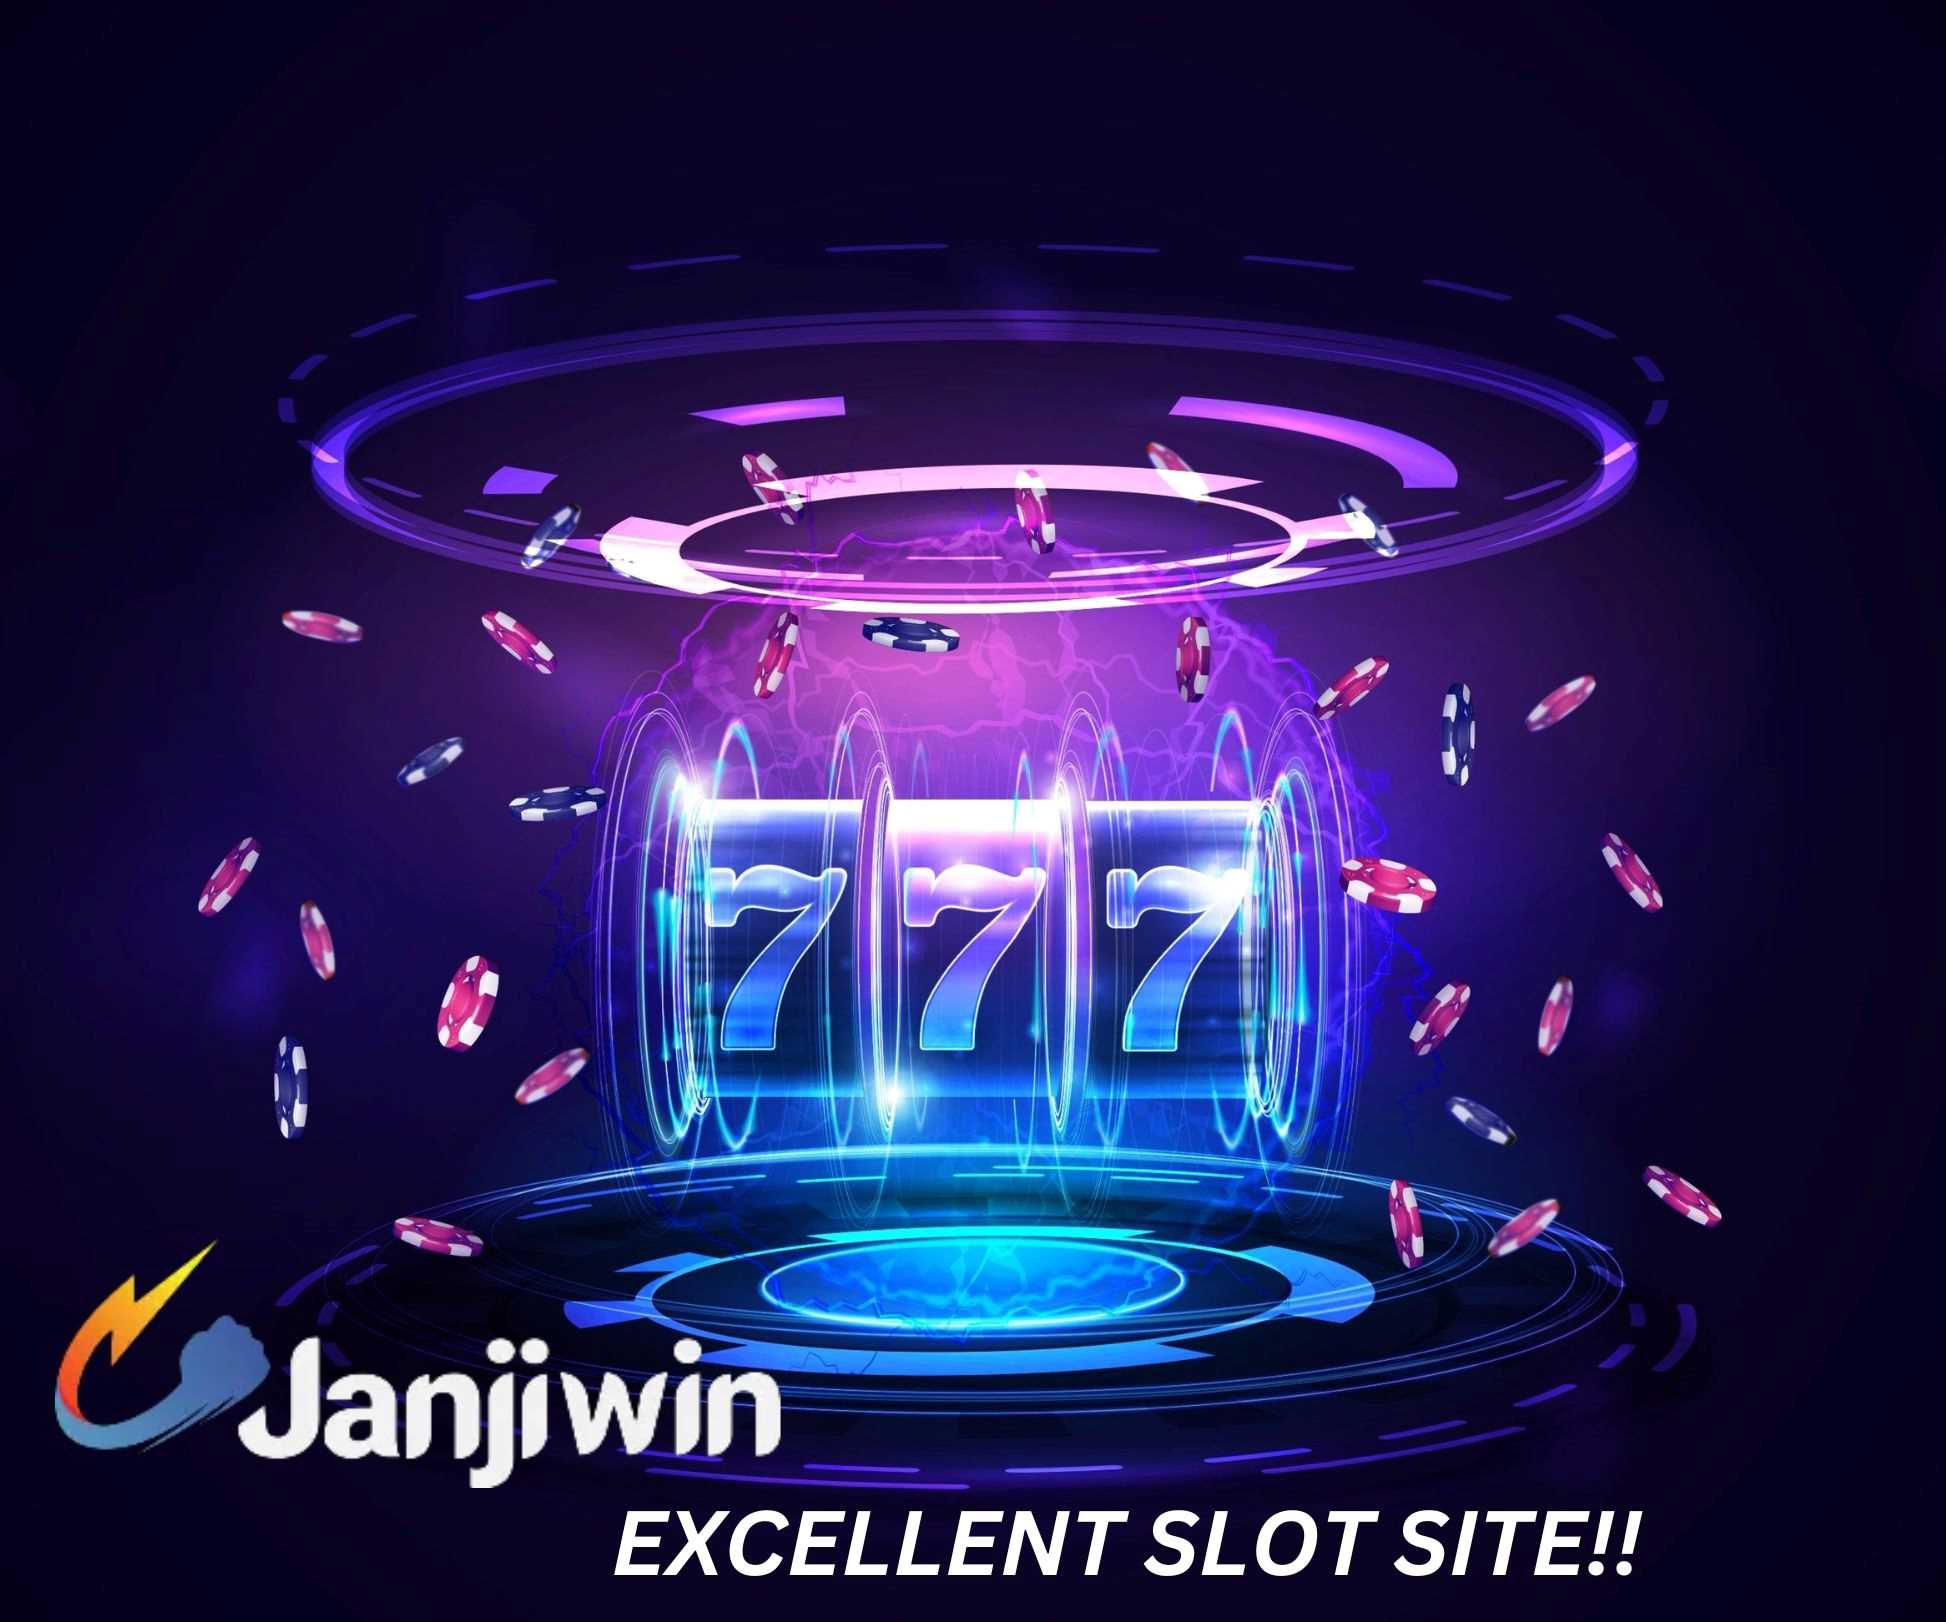 Janjiwin is a viral slot online site because it is easy to make money